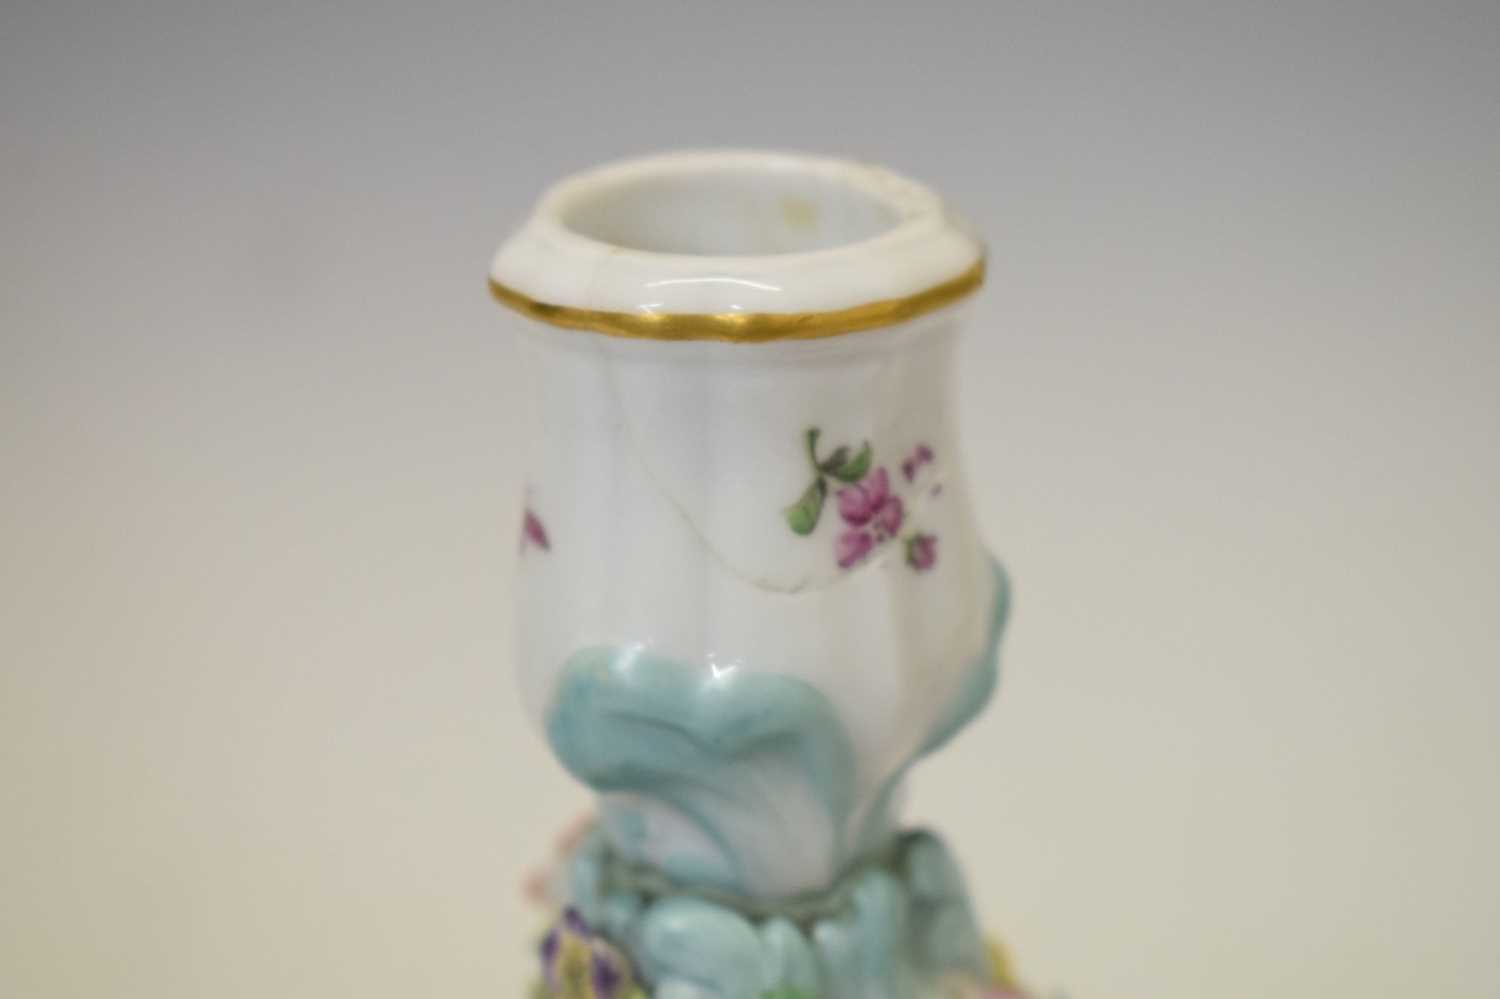 Late 19th/early 20th century Meissen porcelain candlestick - Image 7 of 9